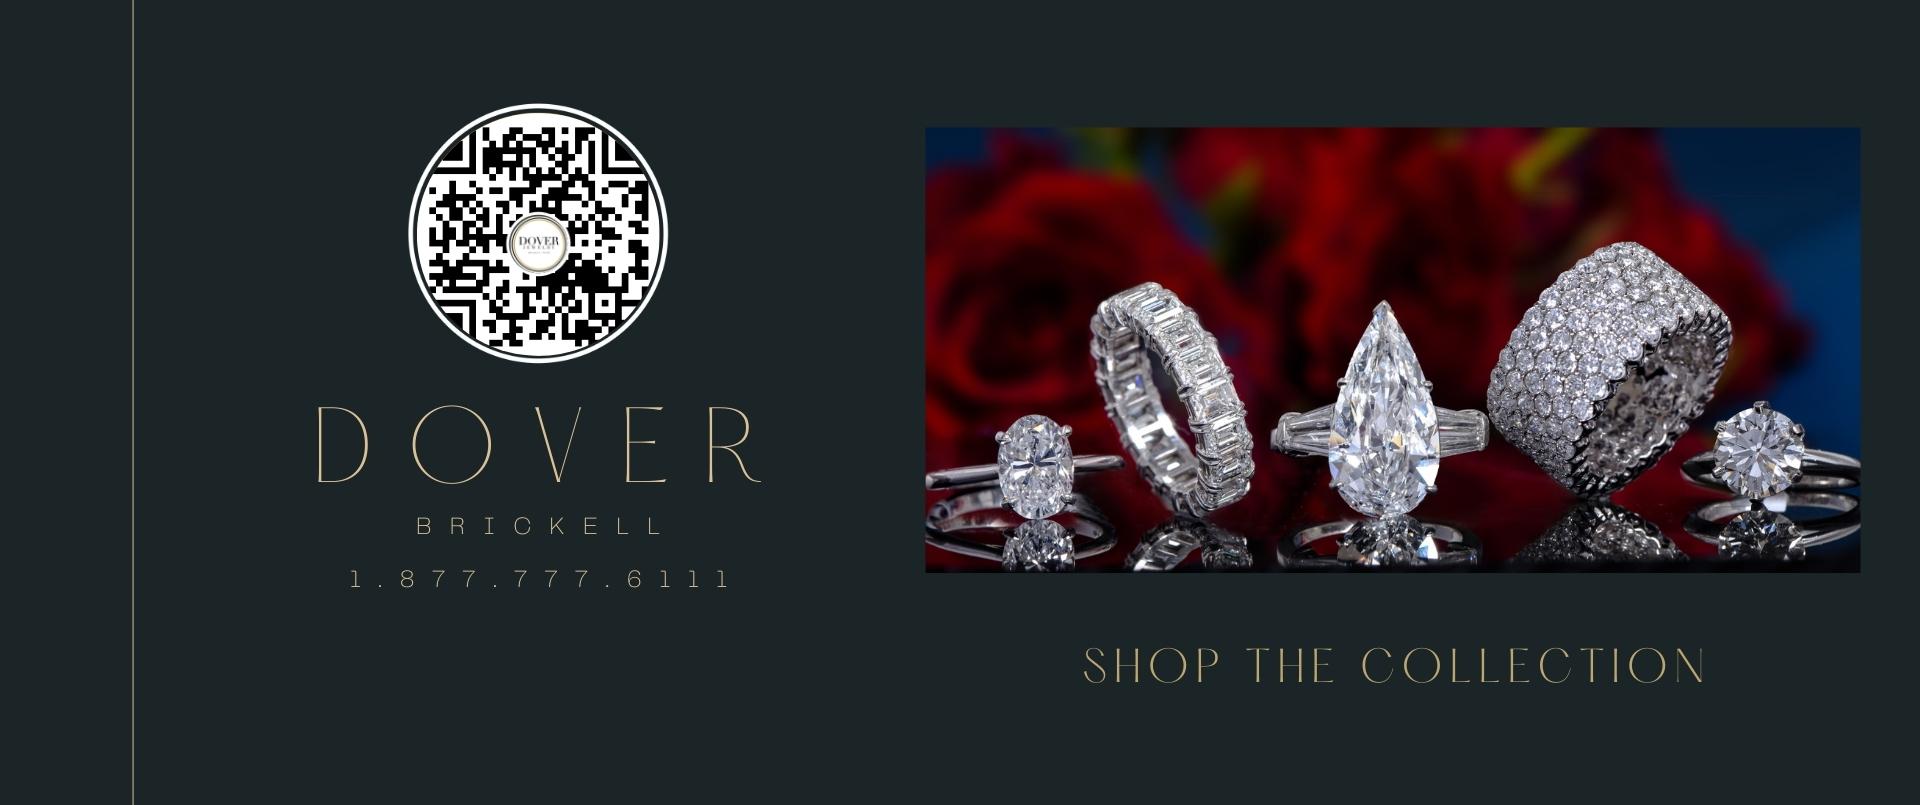 shop diamond engagement rings l Dover Jewelry Brickell